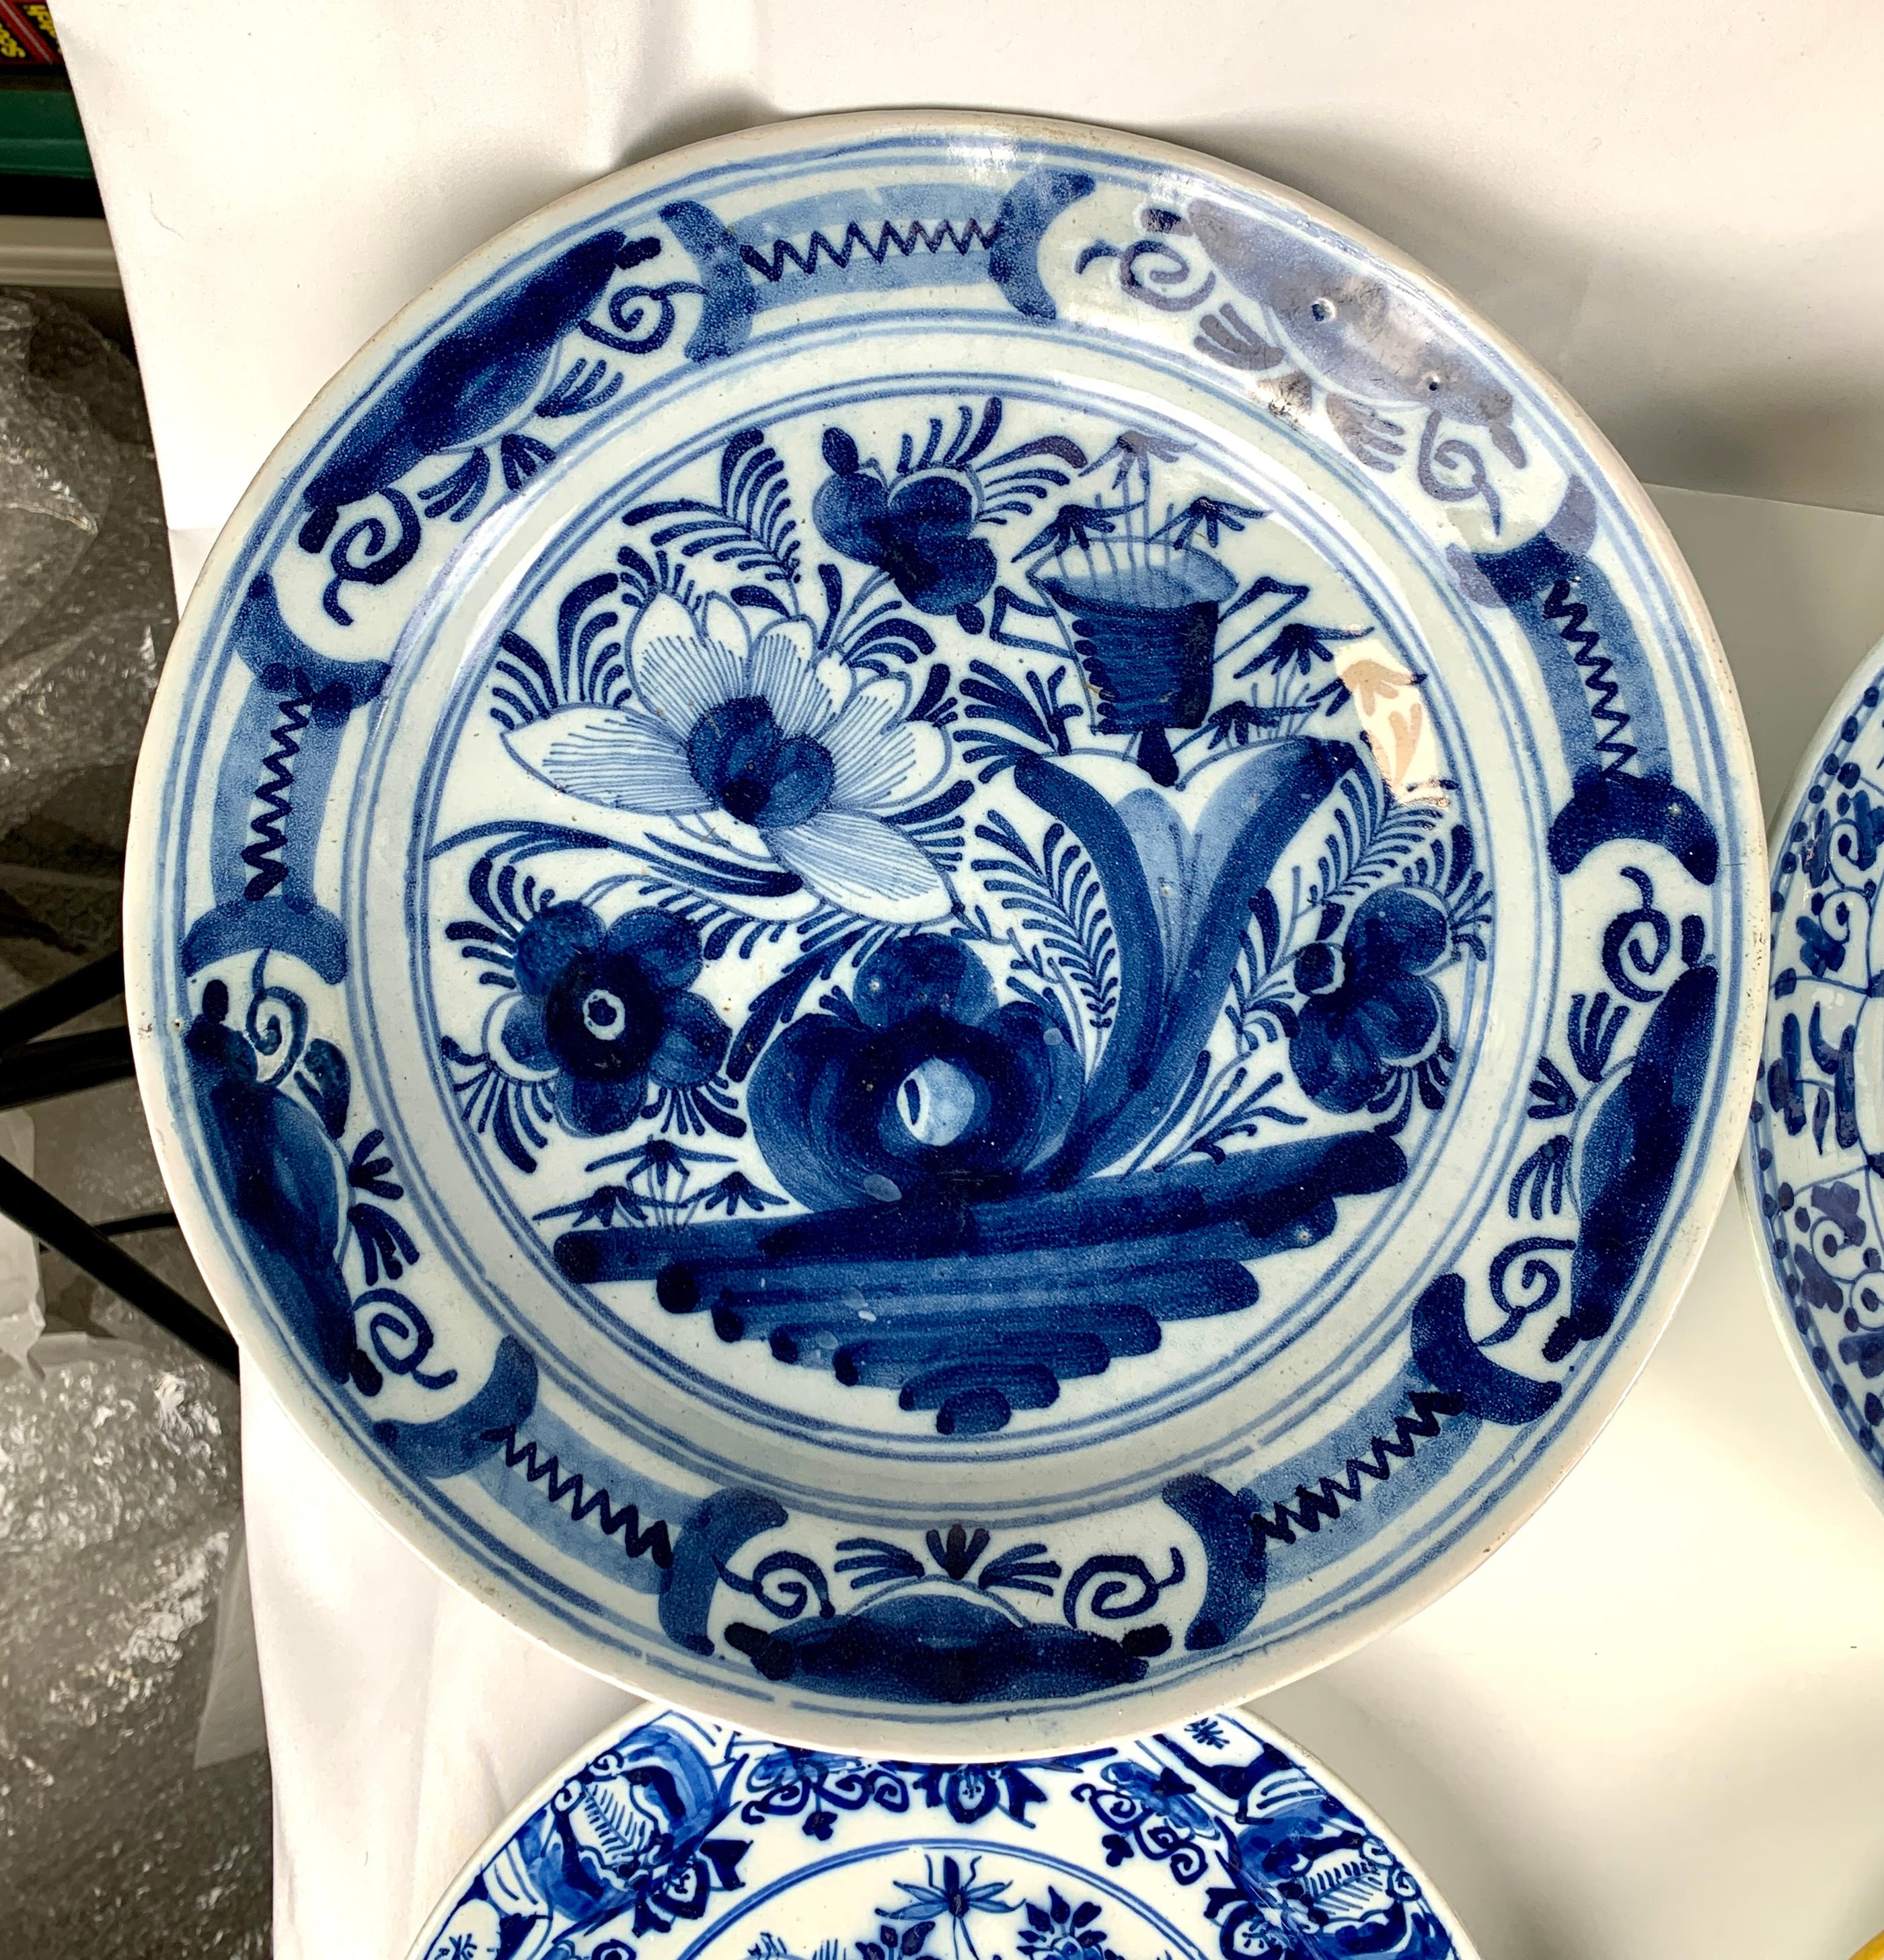 Item 1) Top left
A Dutch Delft blue and white charger Made circa 1800
Showing a waterside scene with a waterlily and in the foreground 